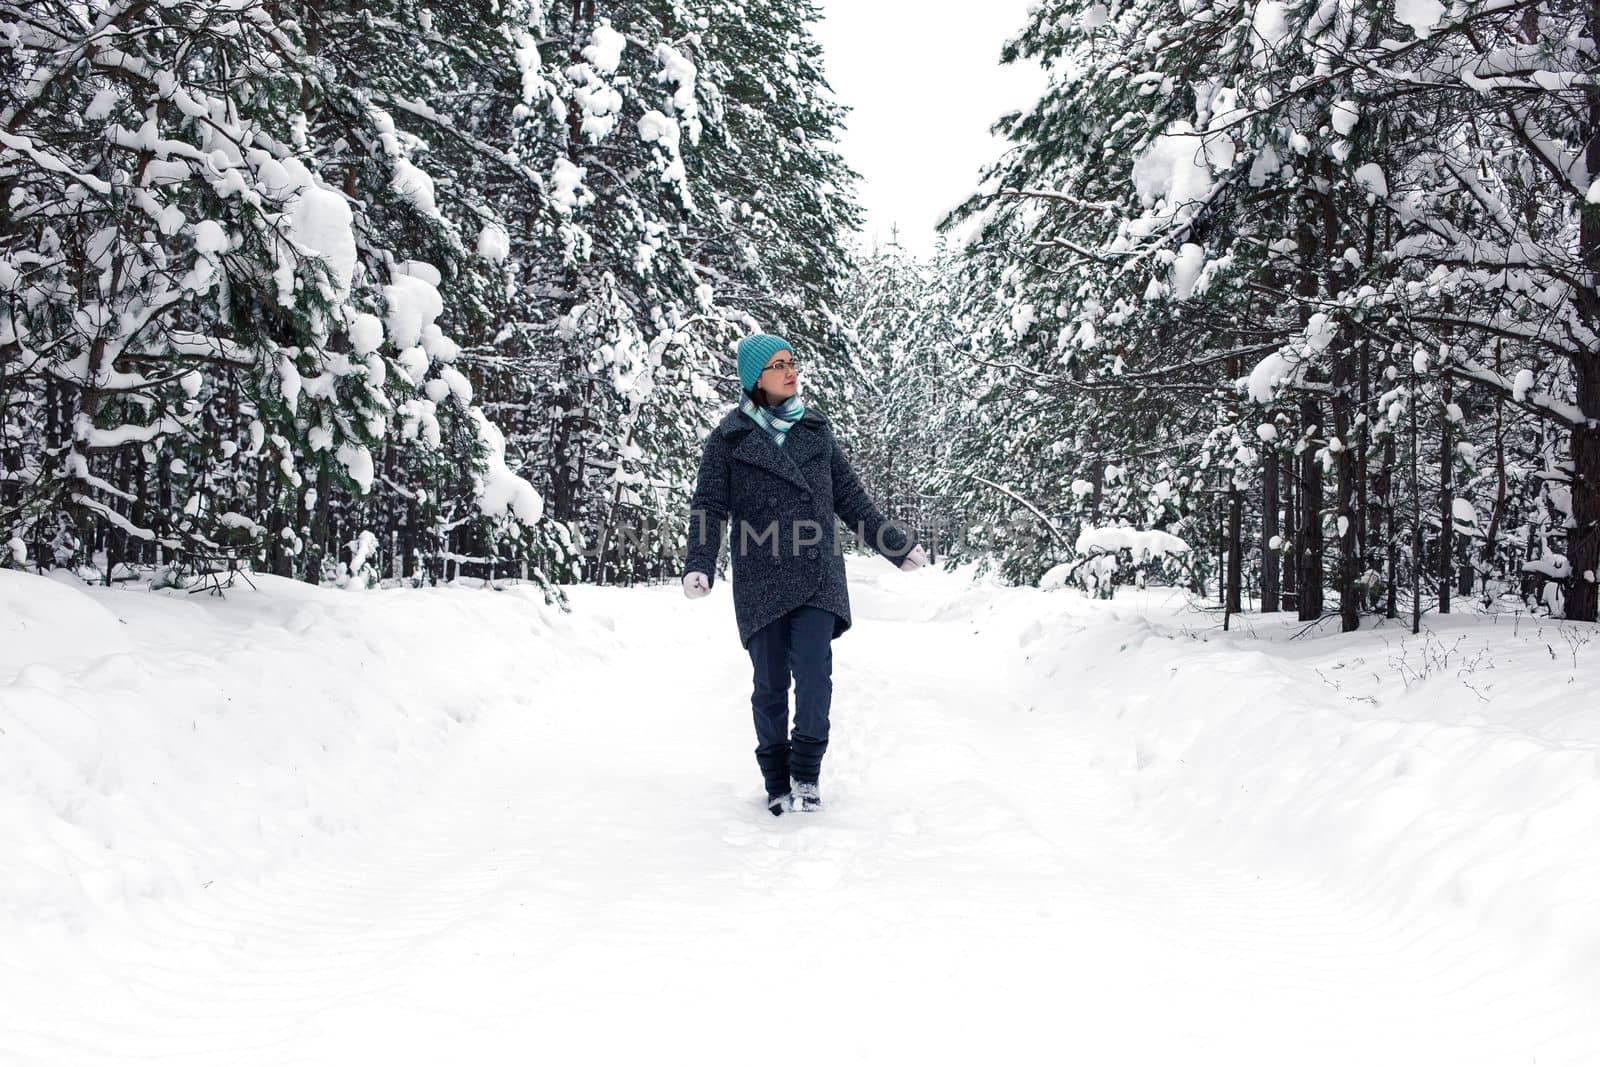 A girl walks through a beautiful winter snowy forest, looks at the trees.